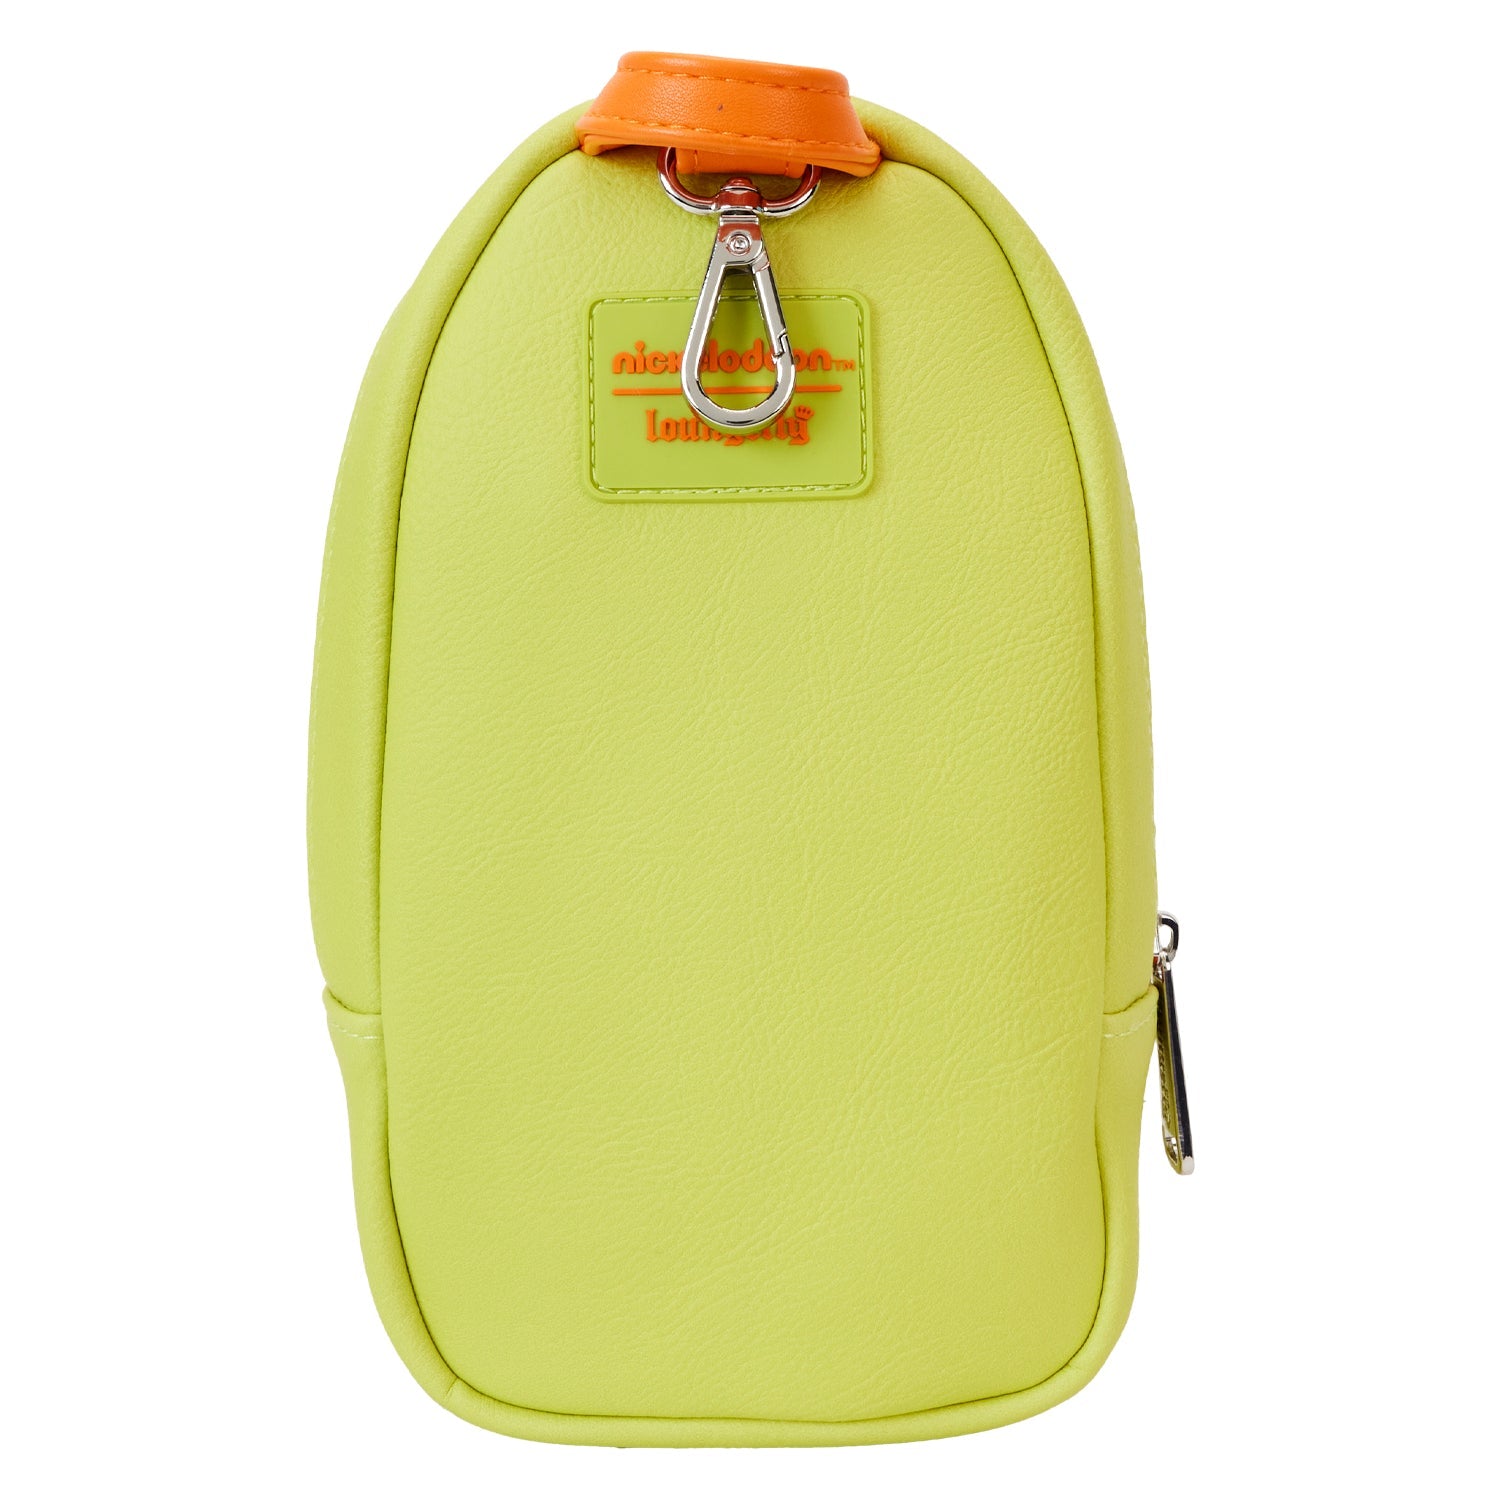 Loungefly x Nickelodeon Rewind Mini Backpack Pencil Case - GeekCore